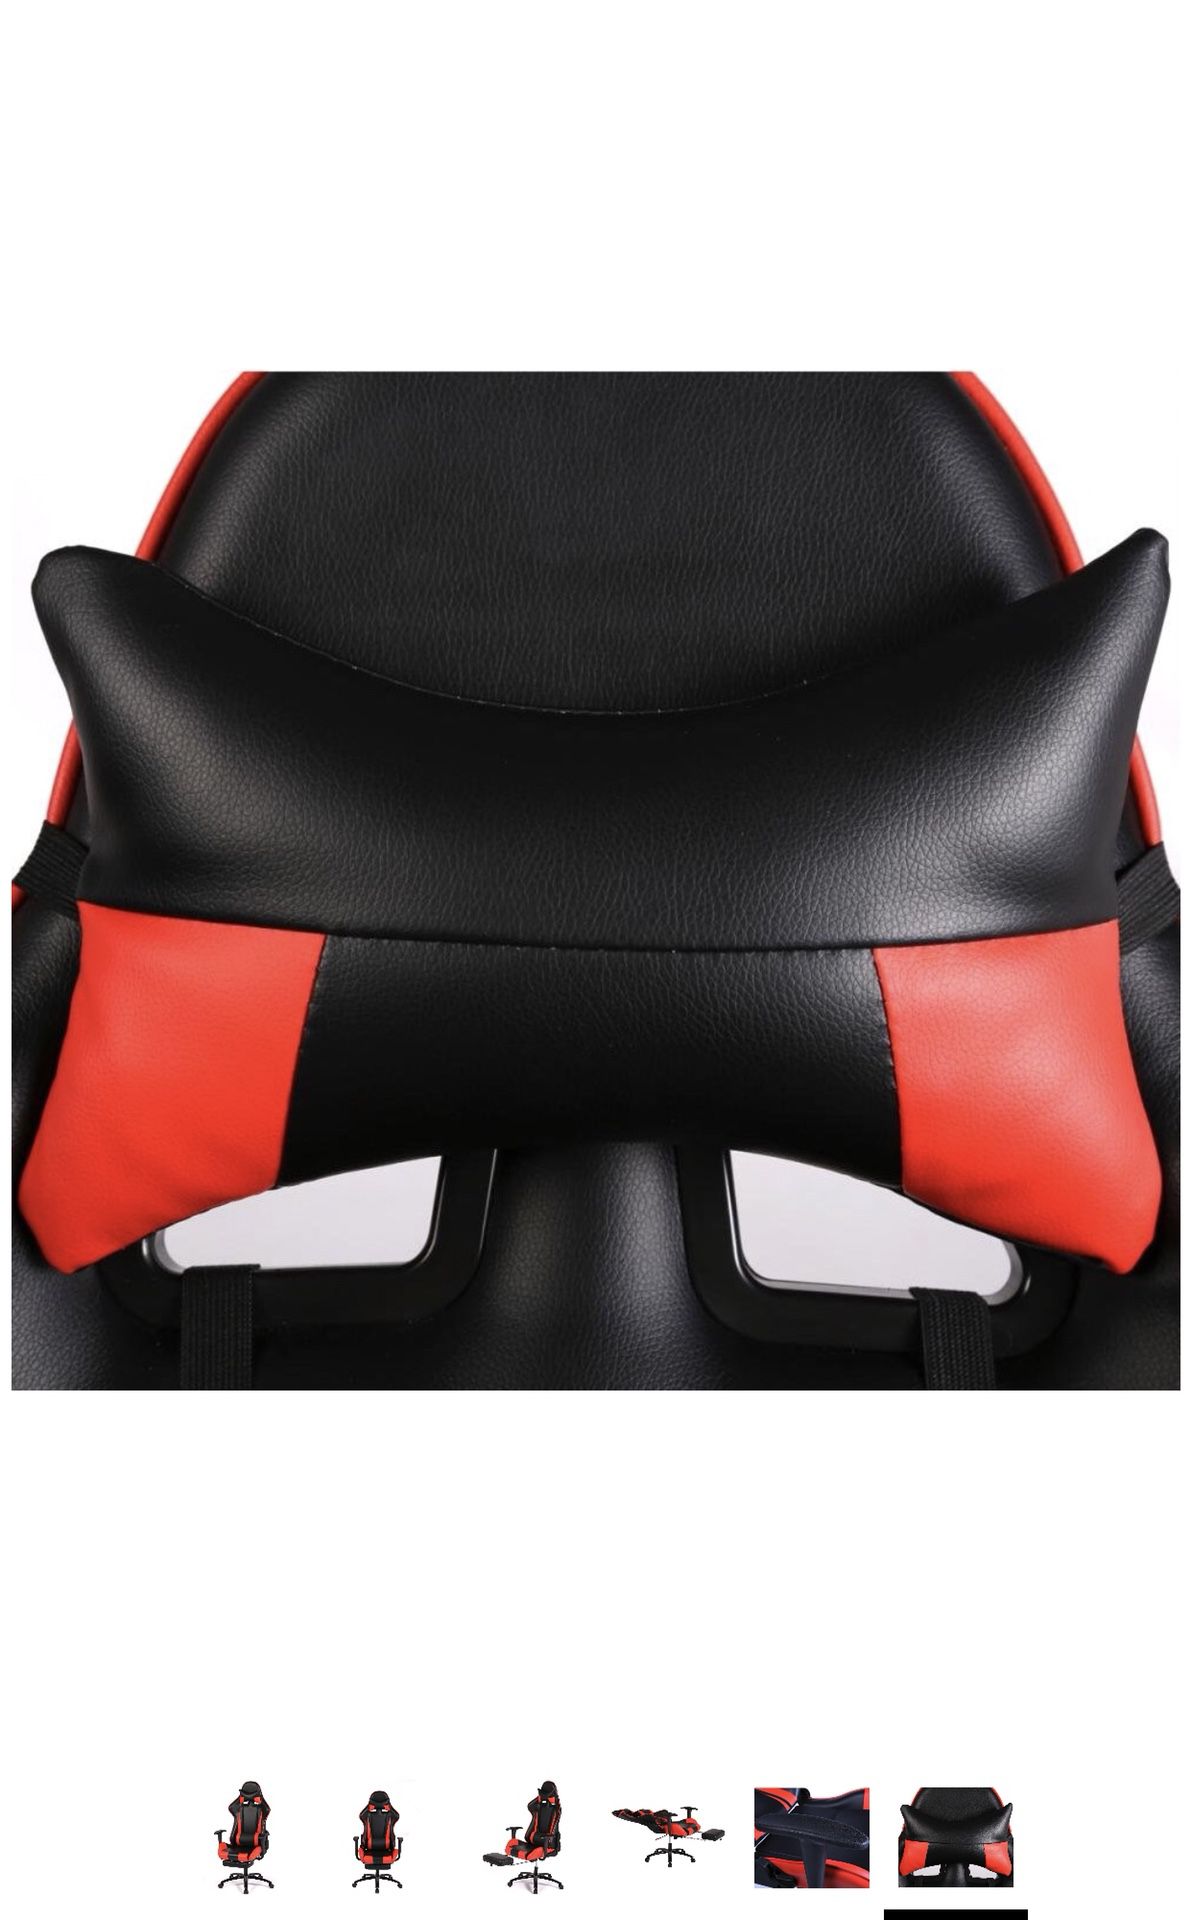 Executive Office Chair Gaming Chair High-back Computer Chair Ergonomic Design Racing Chair w/Lay Flat Function